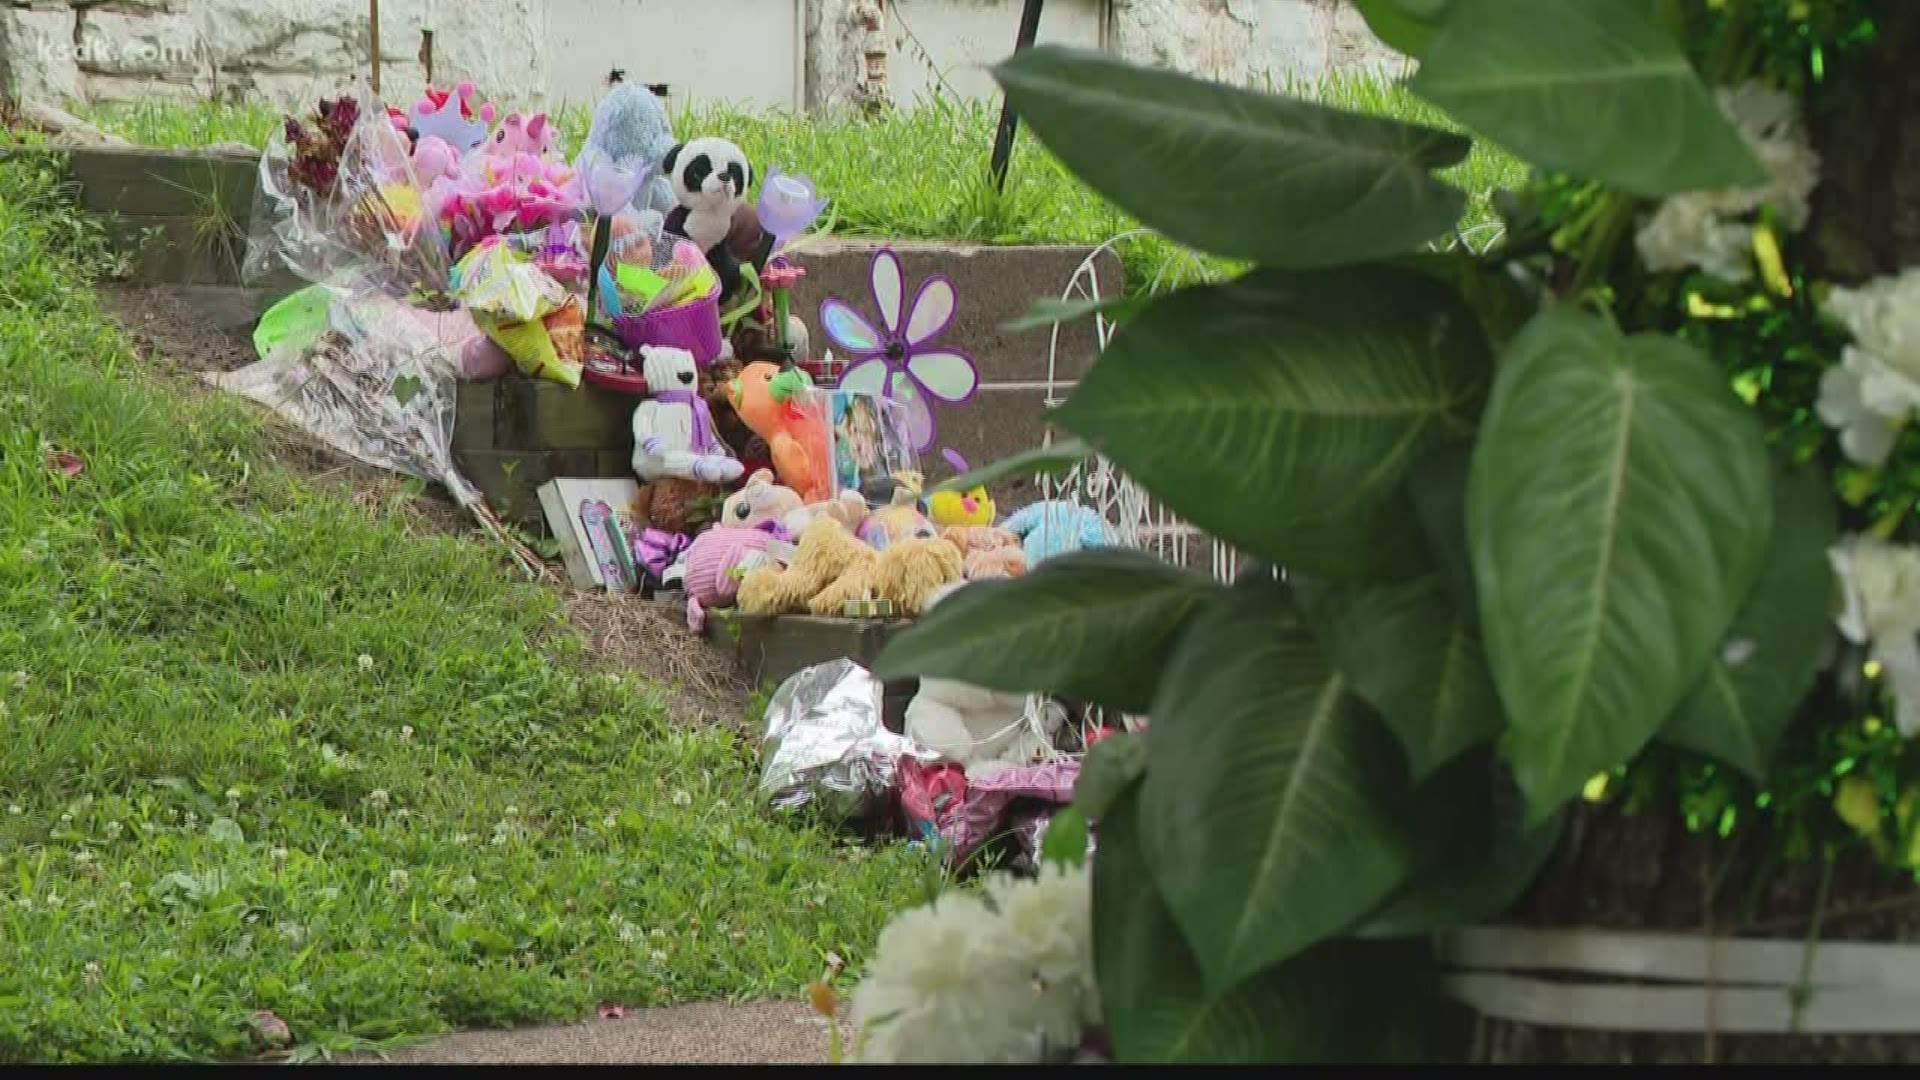 Nearly a dozen kids were killed in our area this summer, district leaders say they're prepared to help where they can.